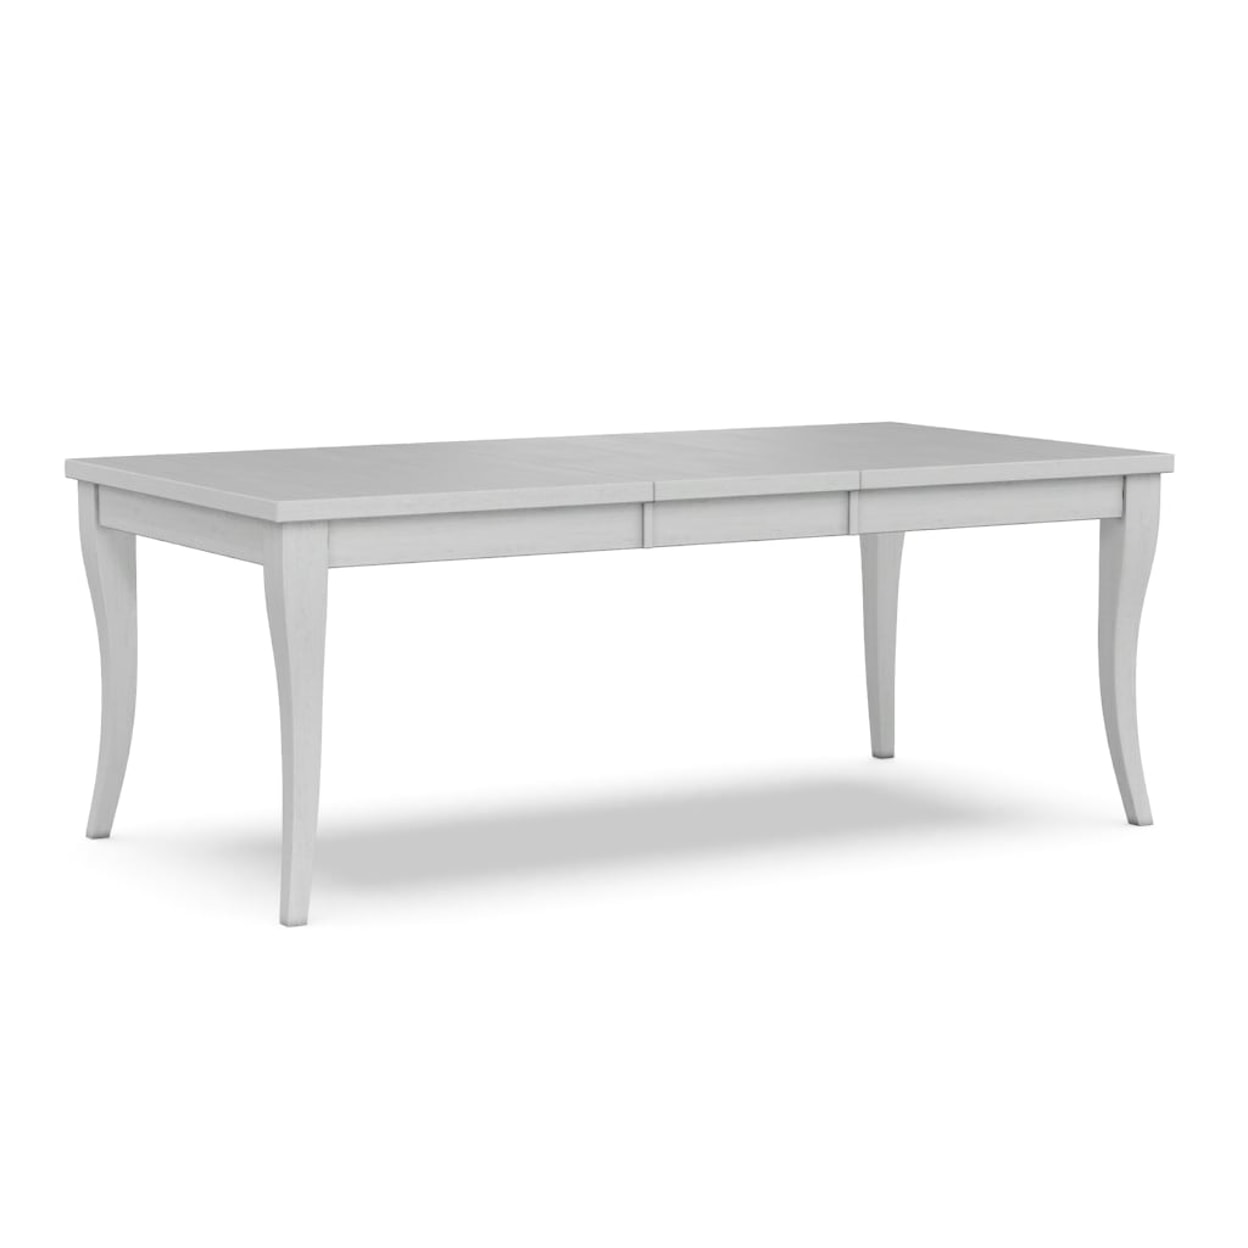 John Thomas Curated Collection Dining Table with Flair Legs